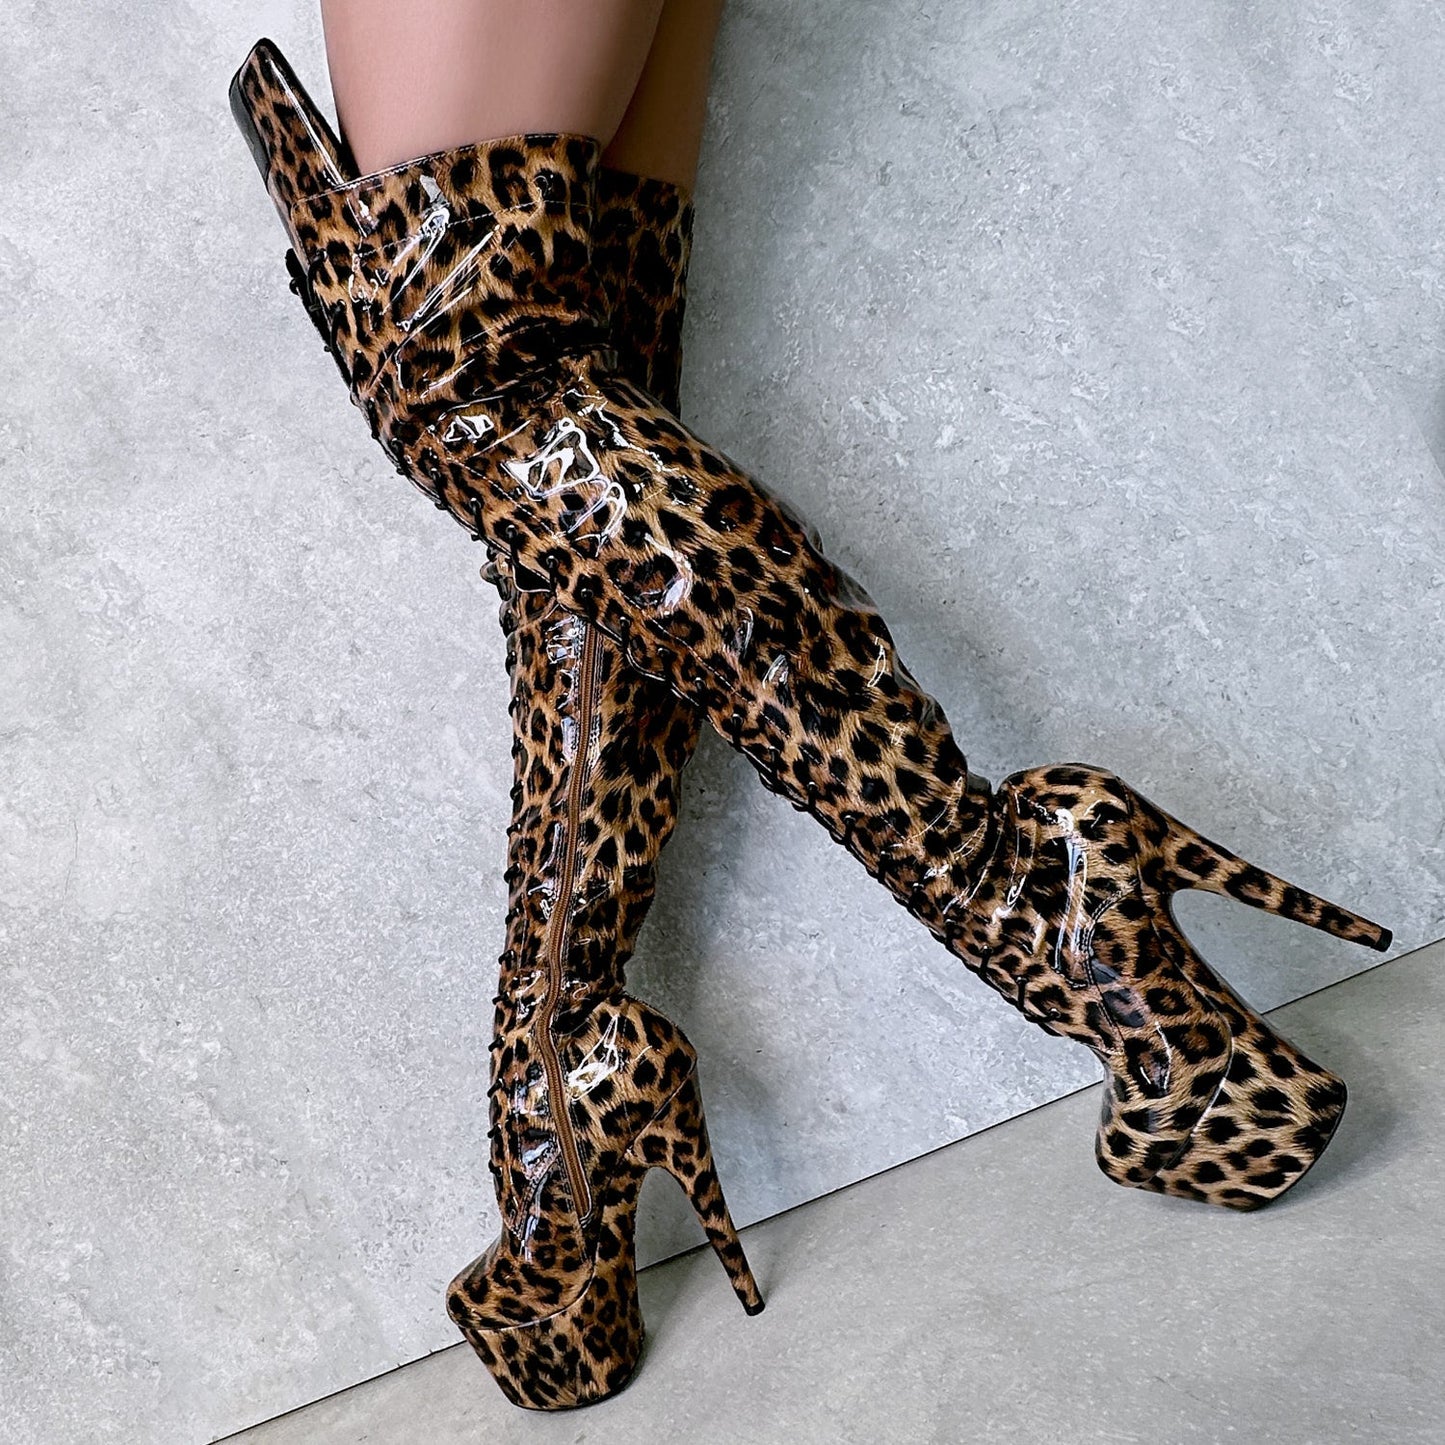 Leopard Restocked! Betcha can't just own one pair of Thigh-High